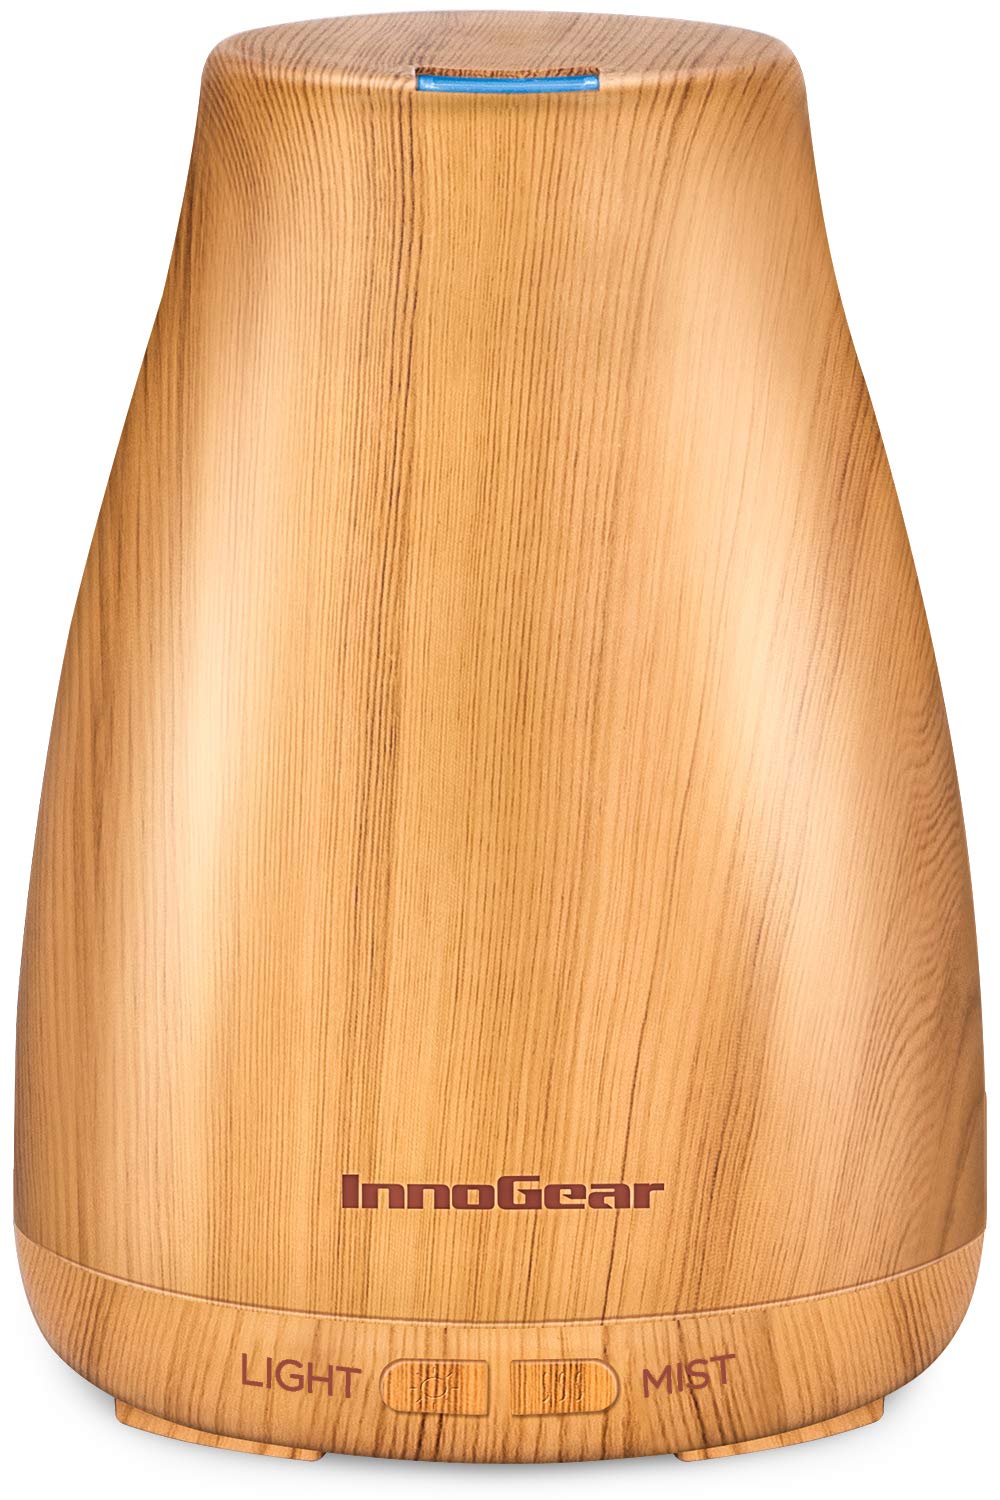 InnoGear Essential Oil Diffuser, Upgraded Diffusers for Essential Oils  Aromatherapy Diffuser Cool Mist Humidifier with 7